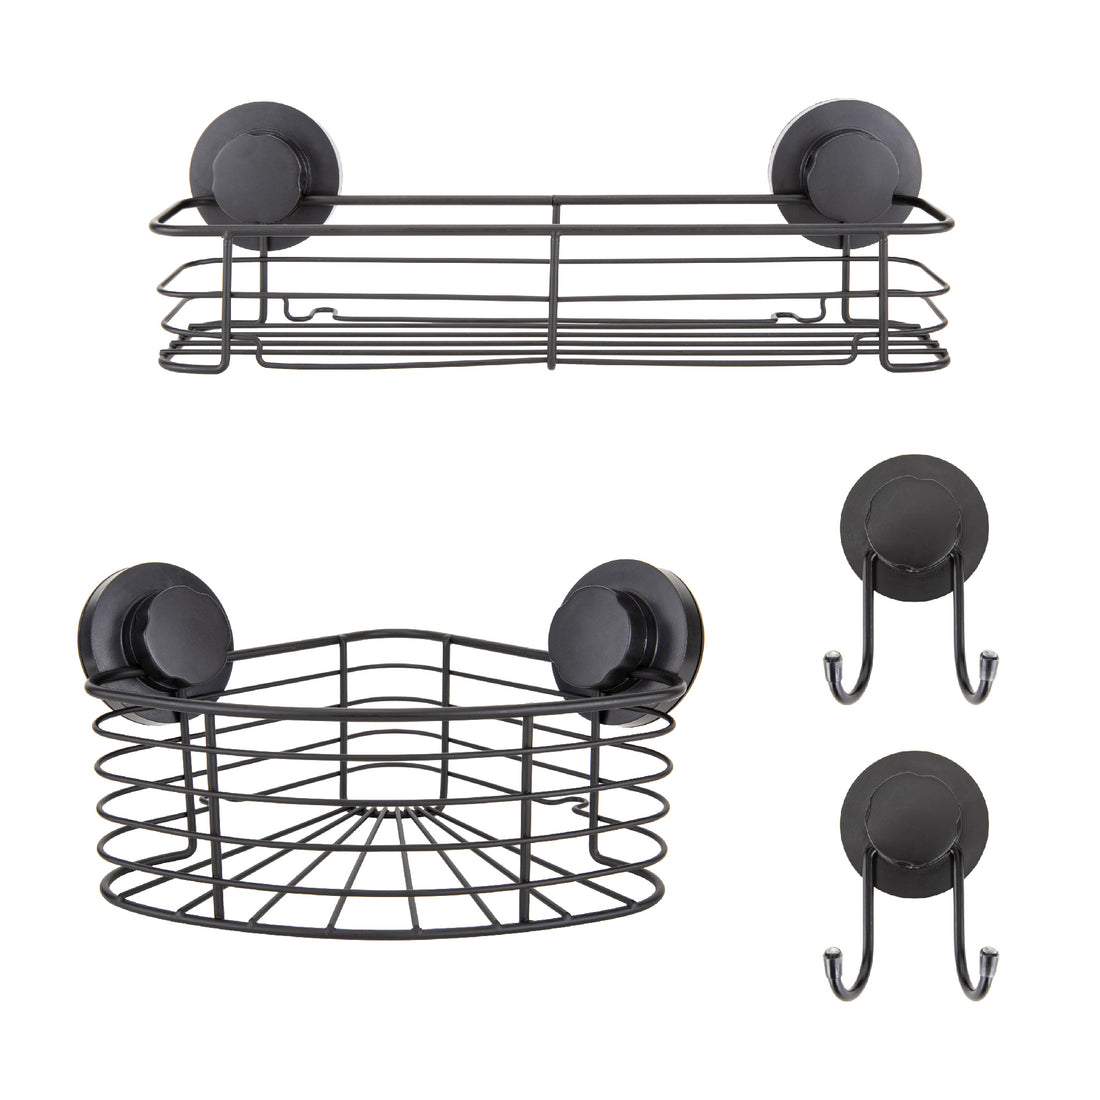 Suction Cup Shower Corner Caddy, Rectangular Suction Cup Shower